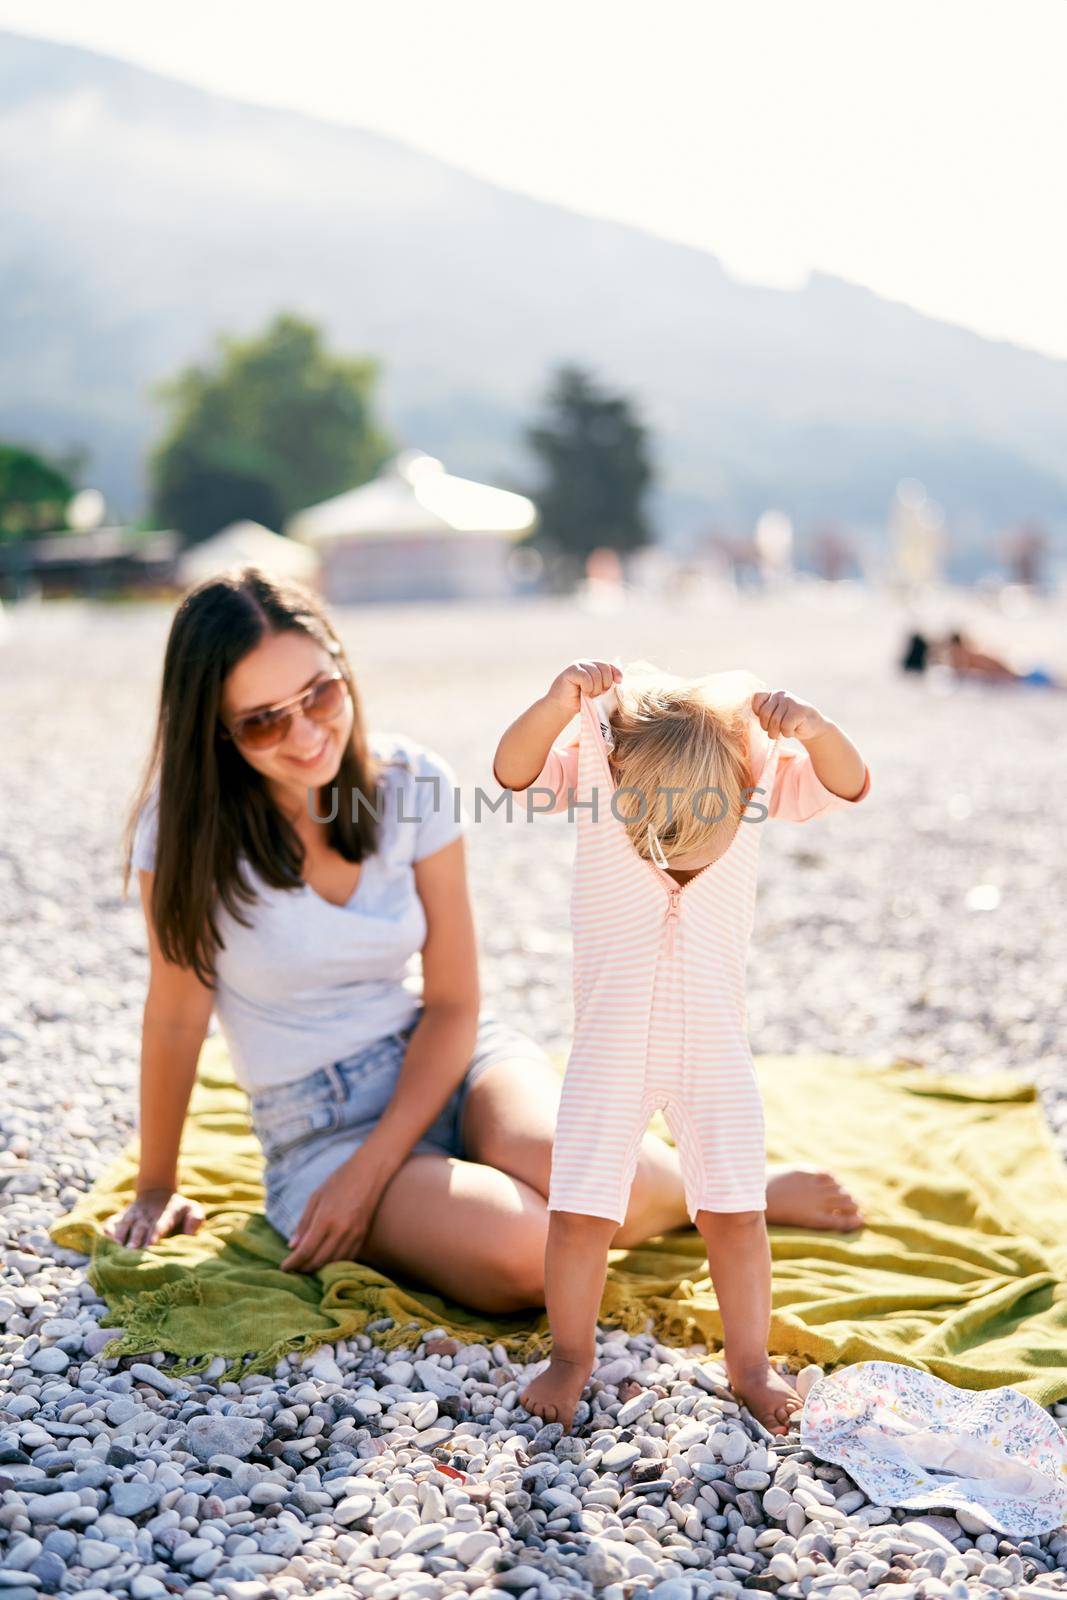 Little girl pulls off overalls while standing on the beach by Nadtochiy